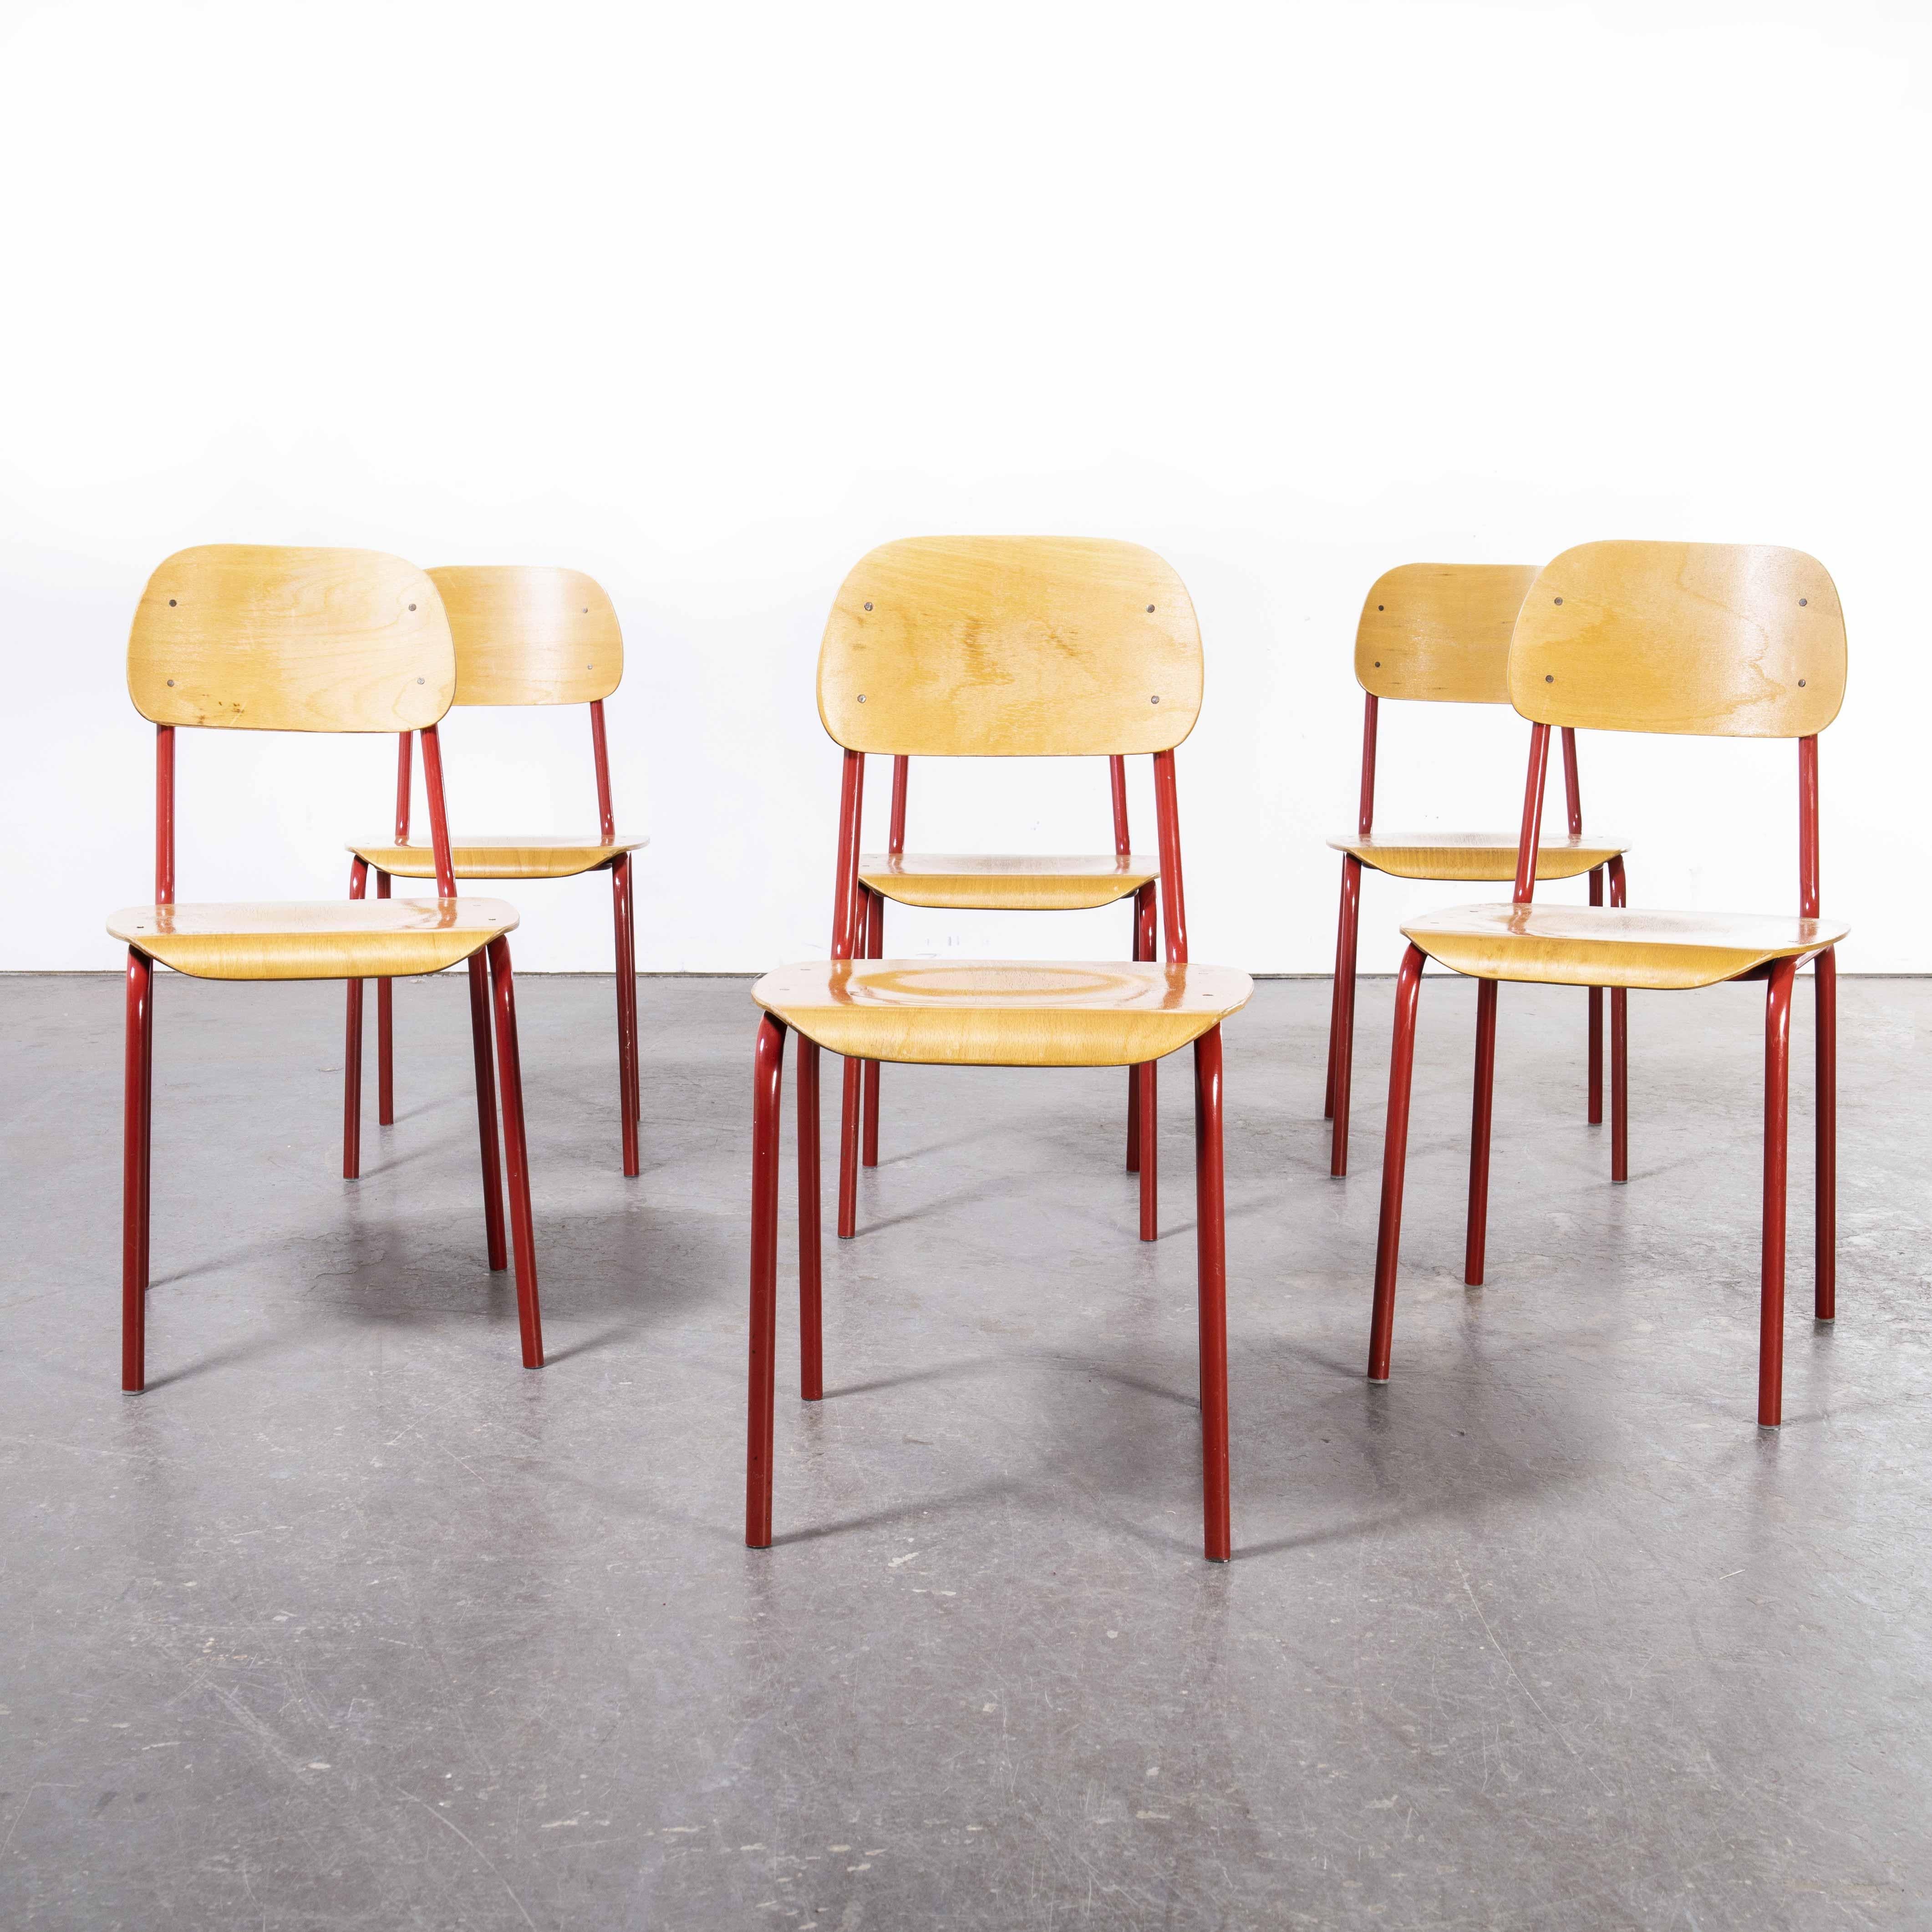 1970's Czech Industrial Stacking Chairs, Red, Set of Six For Sale 2